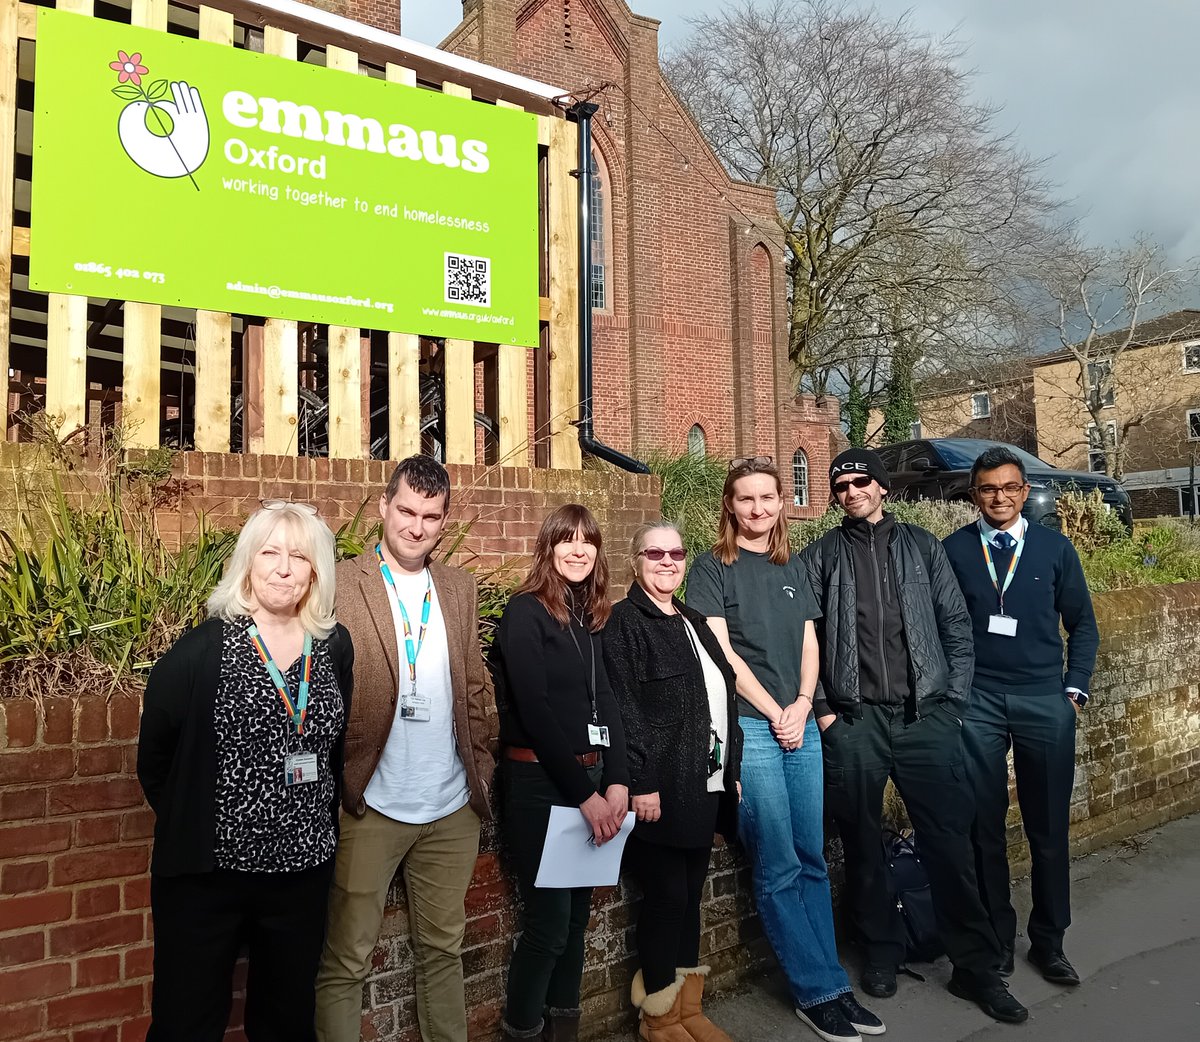 Director of Public Health @Ansaf Azhar and Cllr Nathan Ley visited @Emmaus Homelessness Charity in Oxford to see the amazing work being funded by the Healthy Hearts Grant, which has been key to improving the cardiovascular health of Emmaus companions.